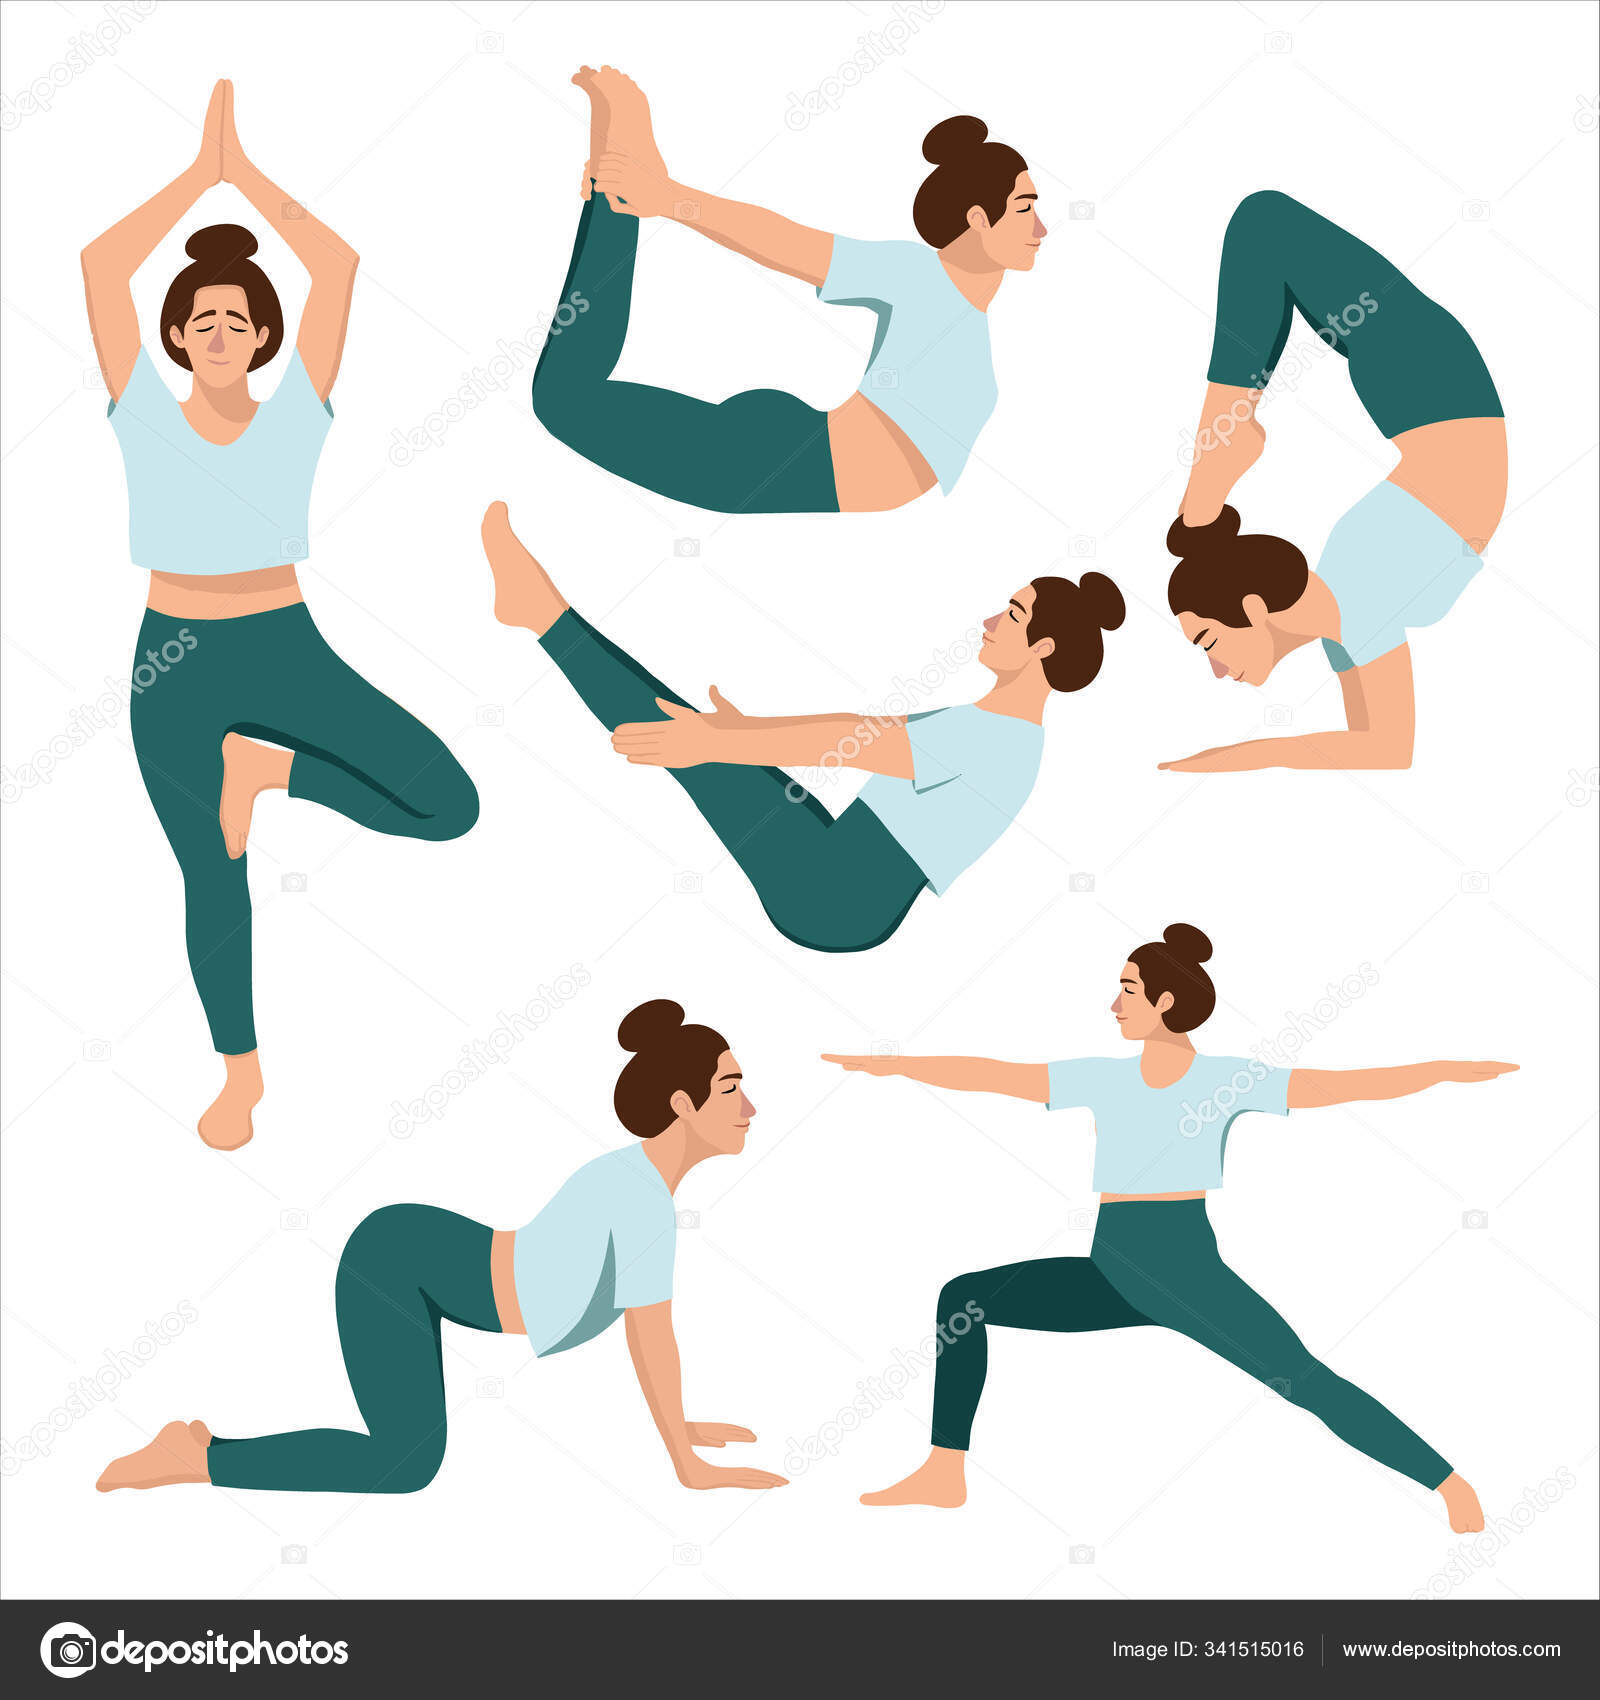 PPT - Best 10 Yoga Poses For Beginners PowerPoint Presentation, free  download - ID:9882830